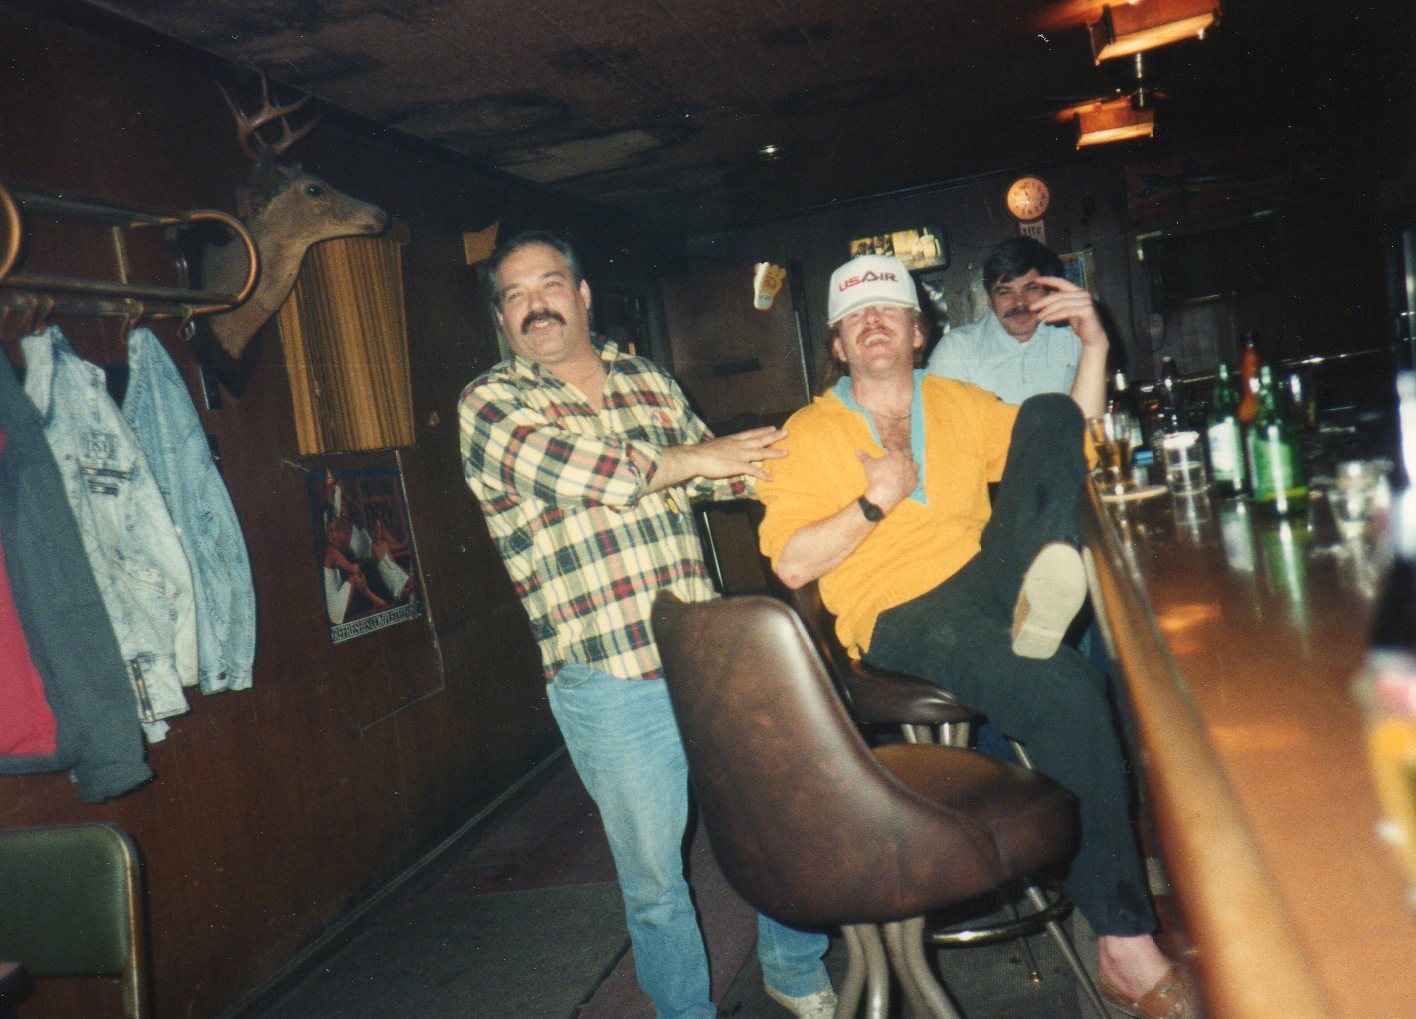 Terry and Cris Morley after nightshift BV watering hole ~1988
